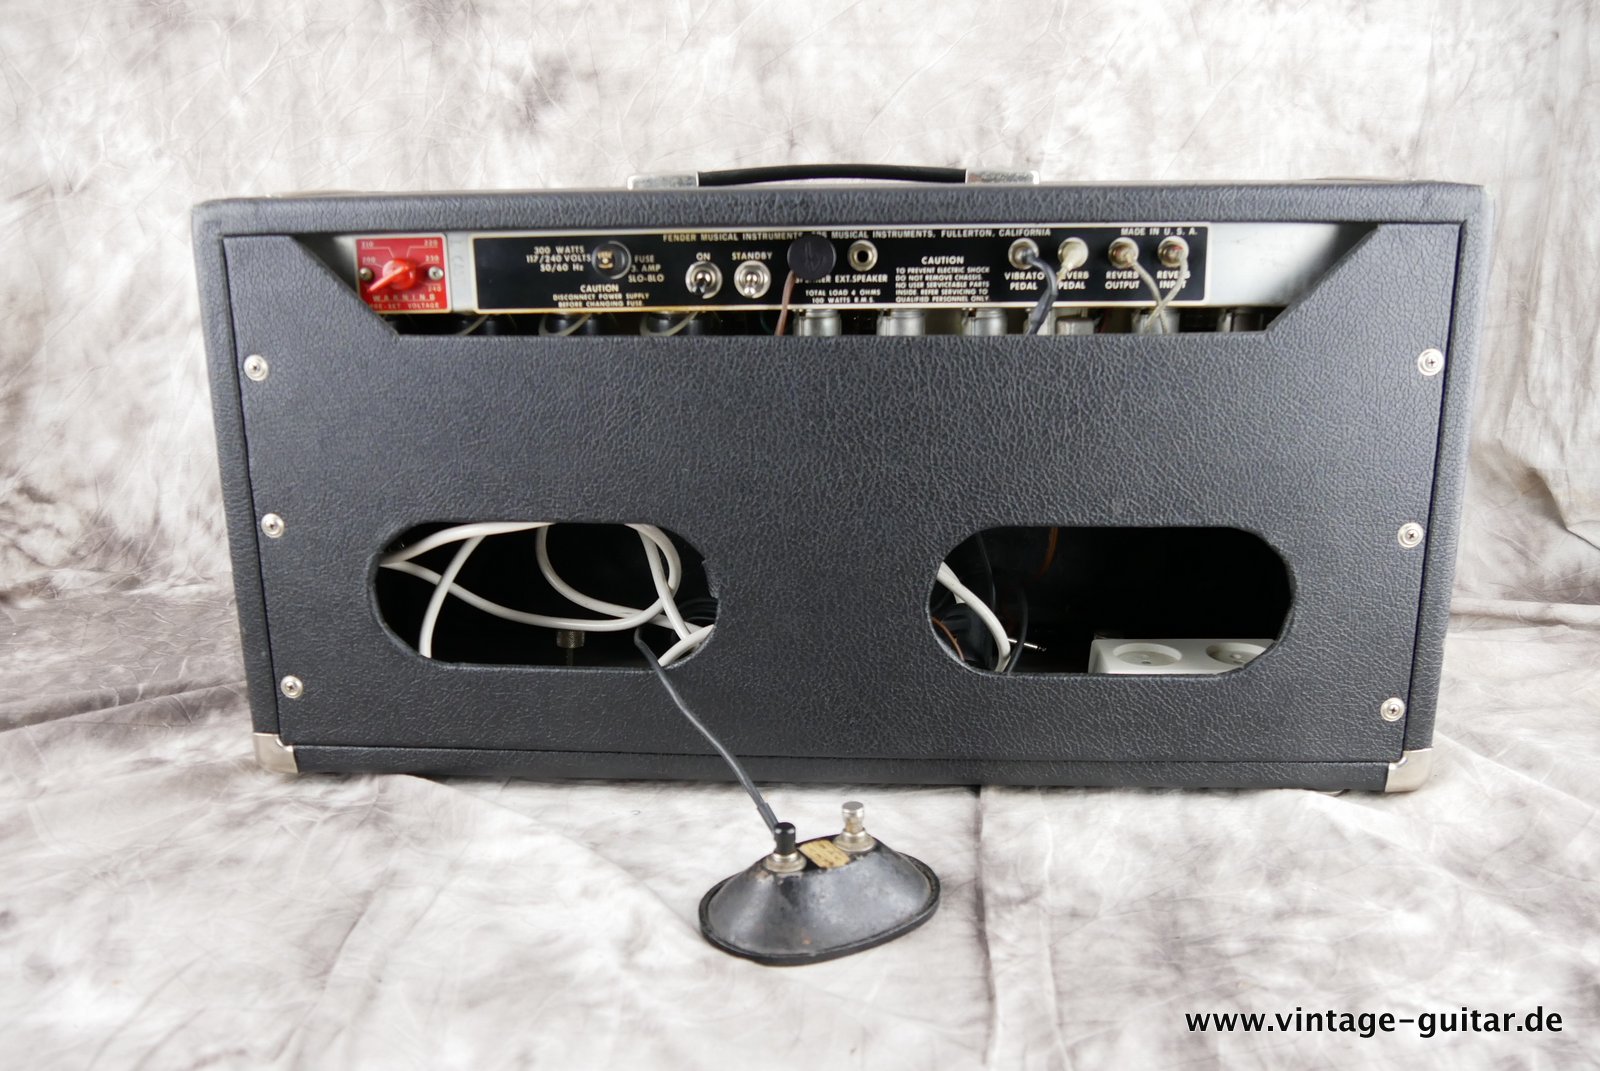 Fender-Showman-top-and-cabinet-1973-005.JPG